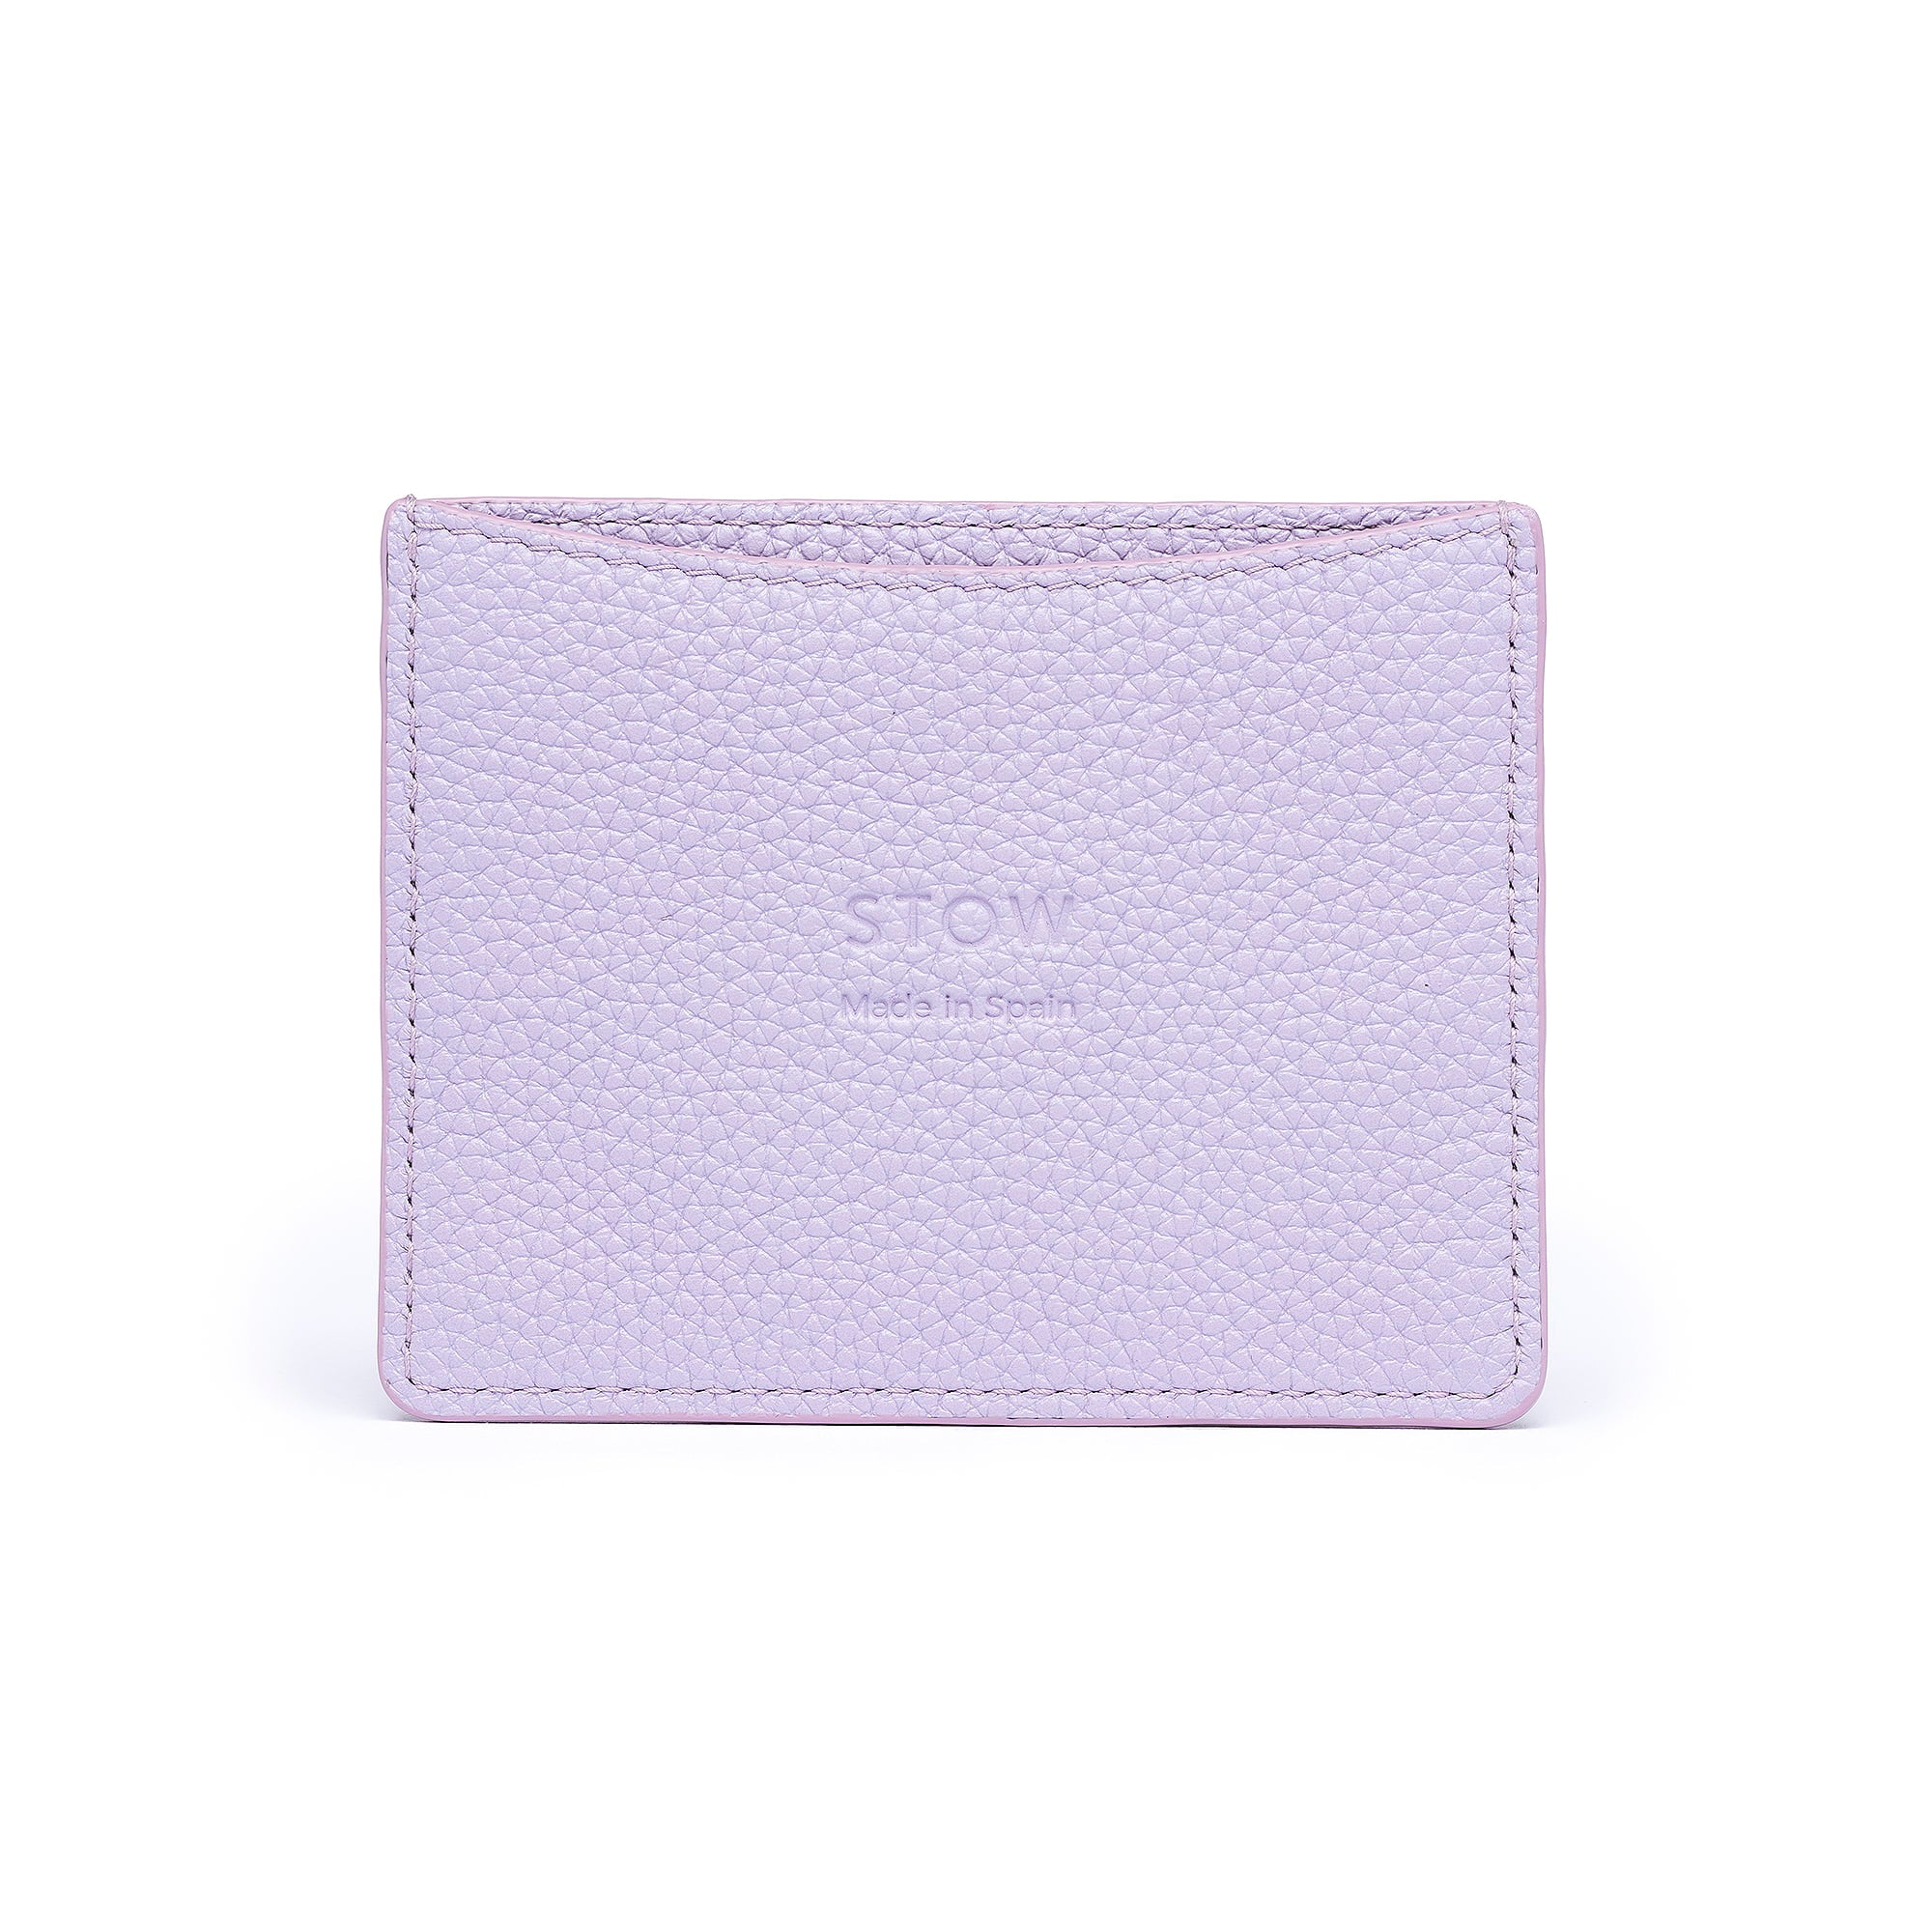 STOW Leather Cardholder in Wild Lavender colour.